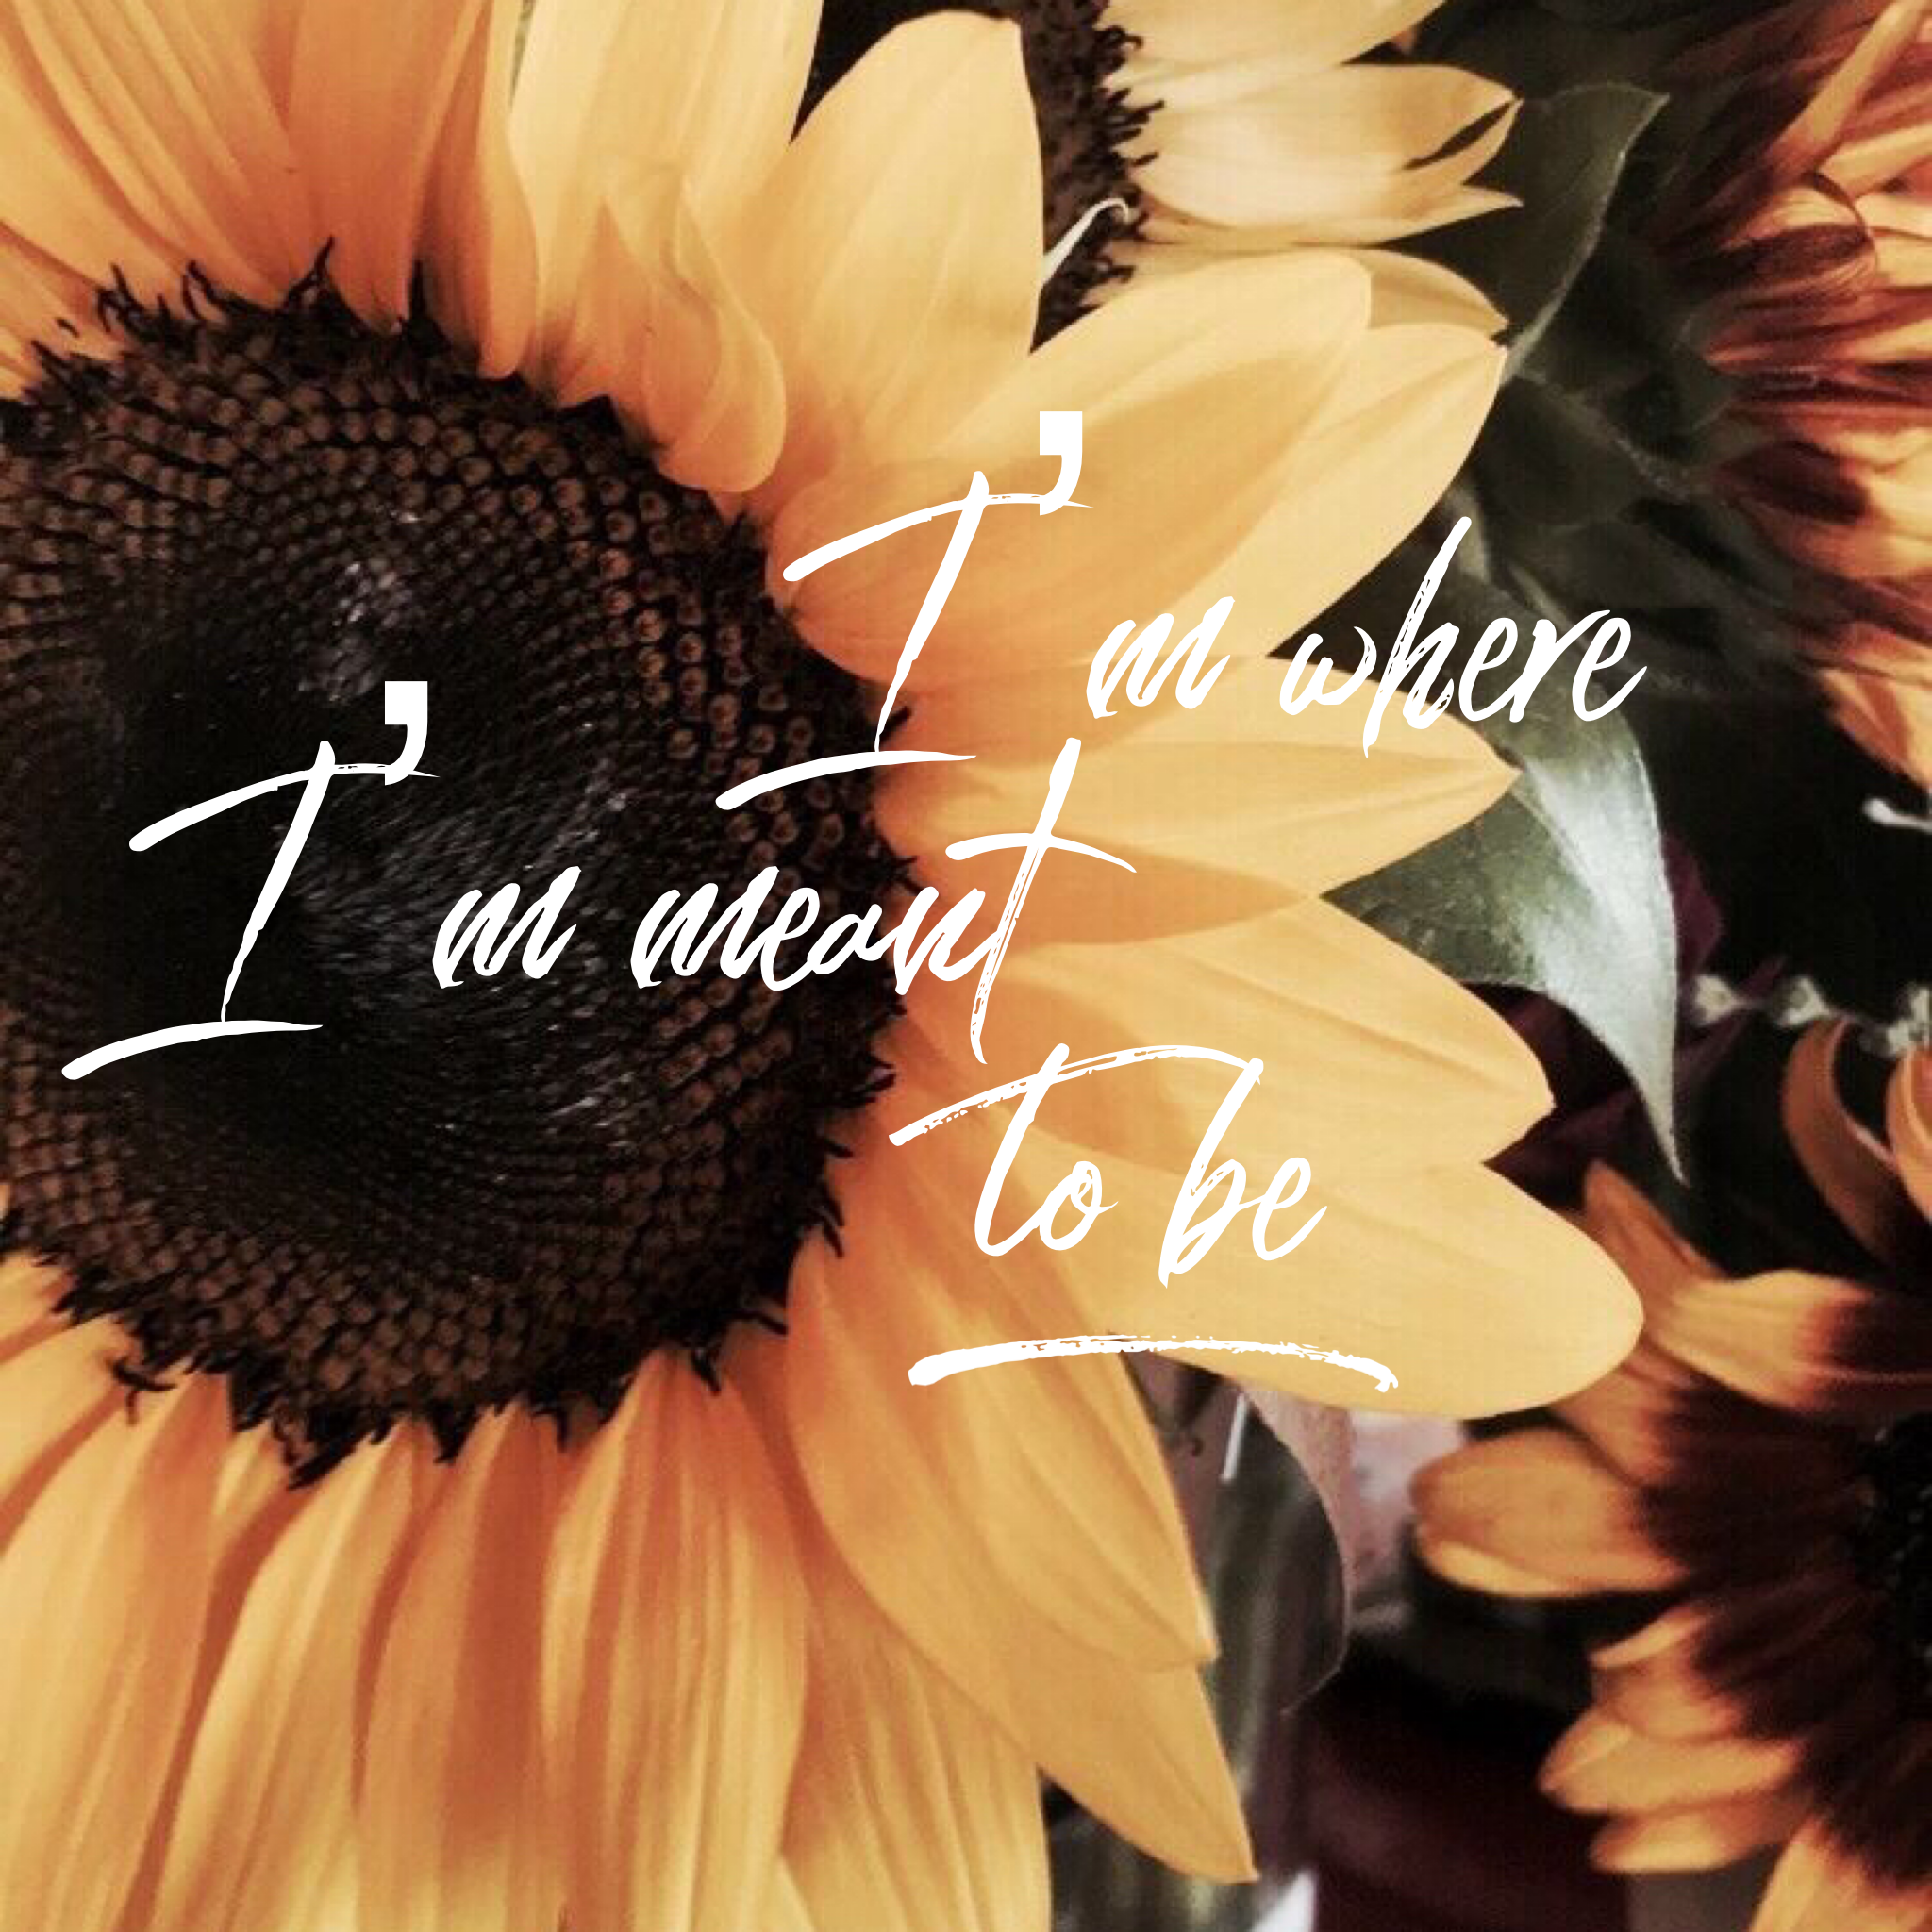 Sunflower Quotes Wallpaper